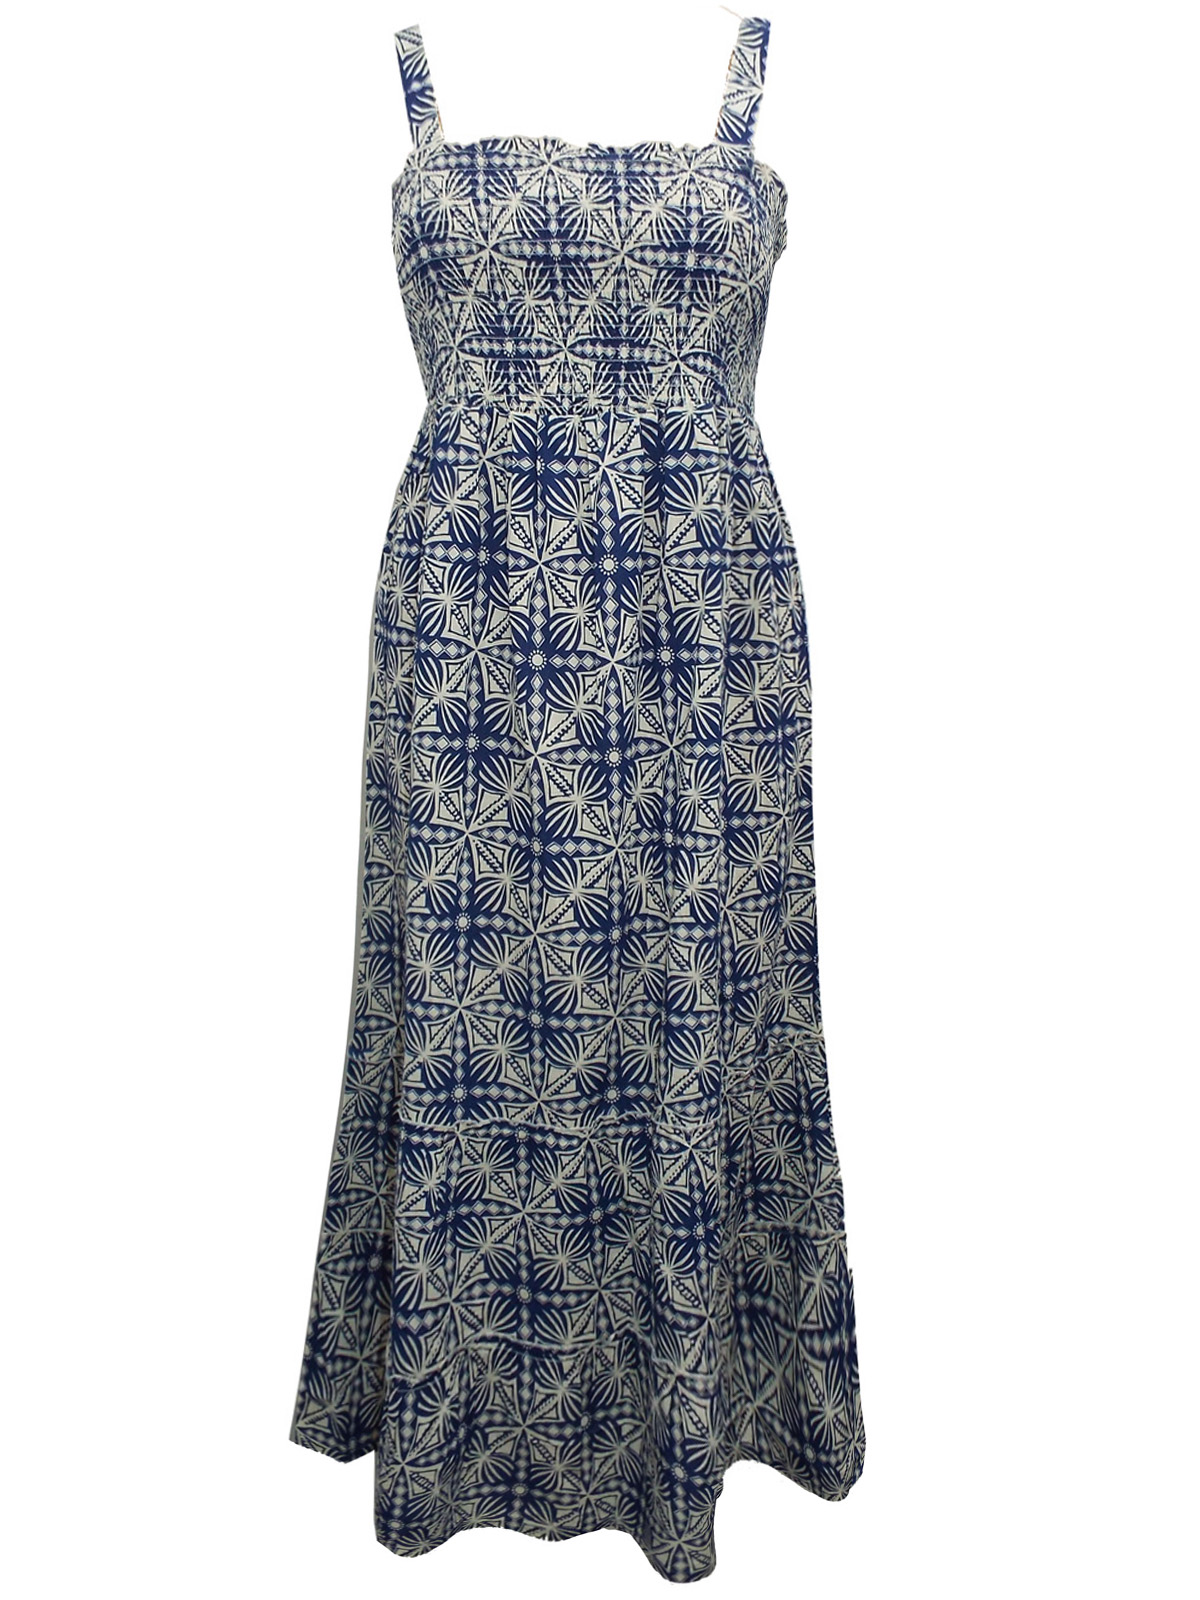 BLUE Pure Cotton Printed Shirred Maxi Dress - Plus Size 14/16 to 30/32